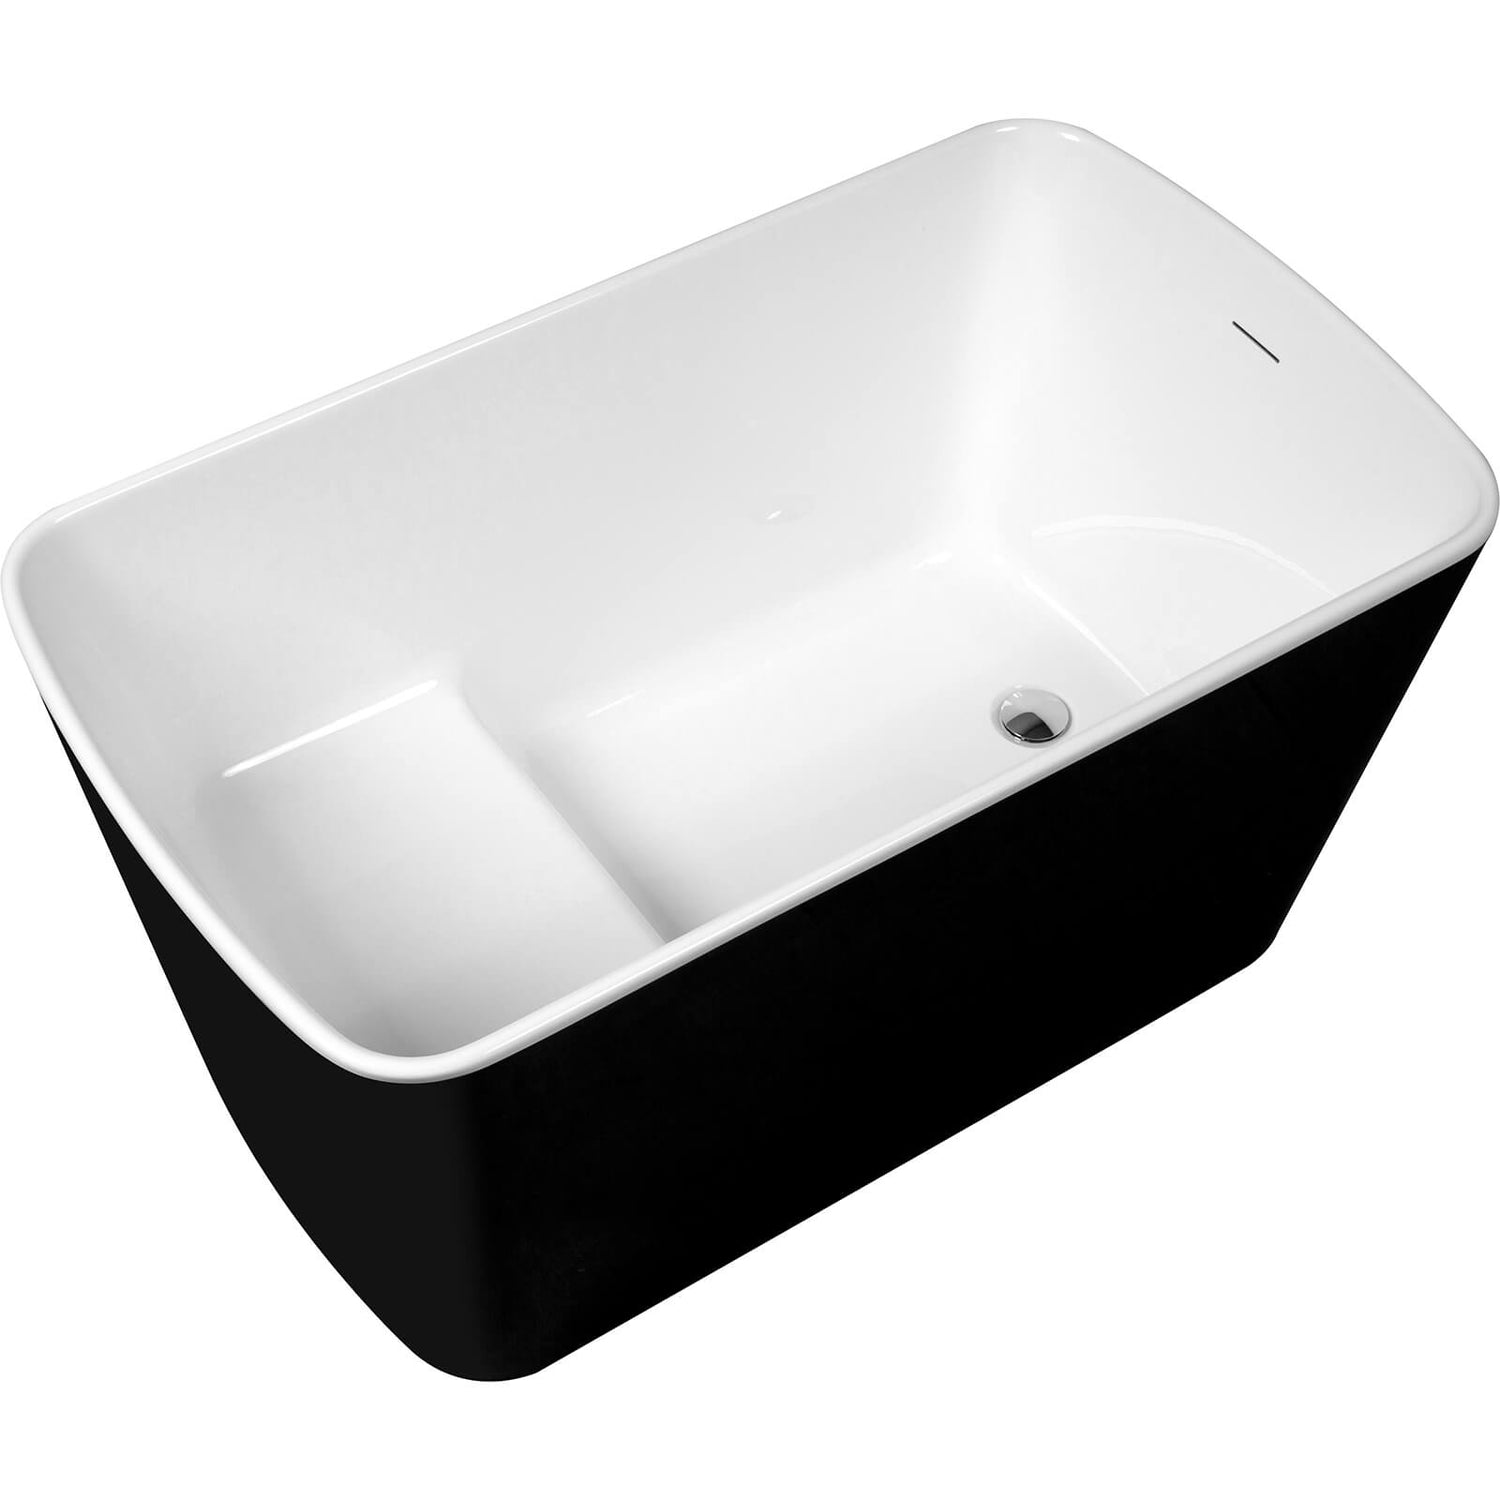 Japanese style 49 inch small size sitting bathtub with Stand Alone design